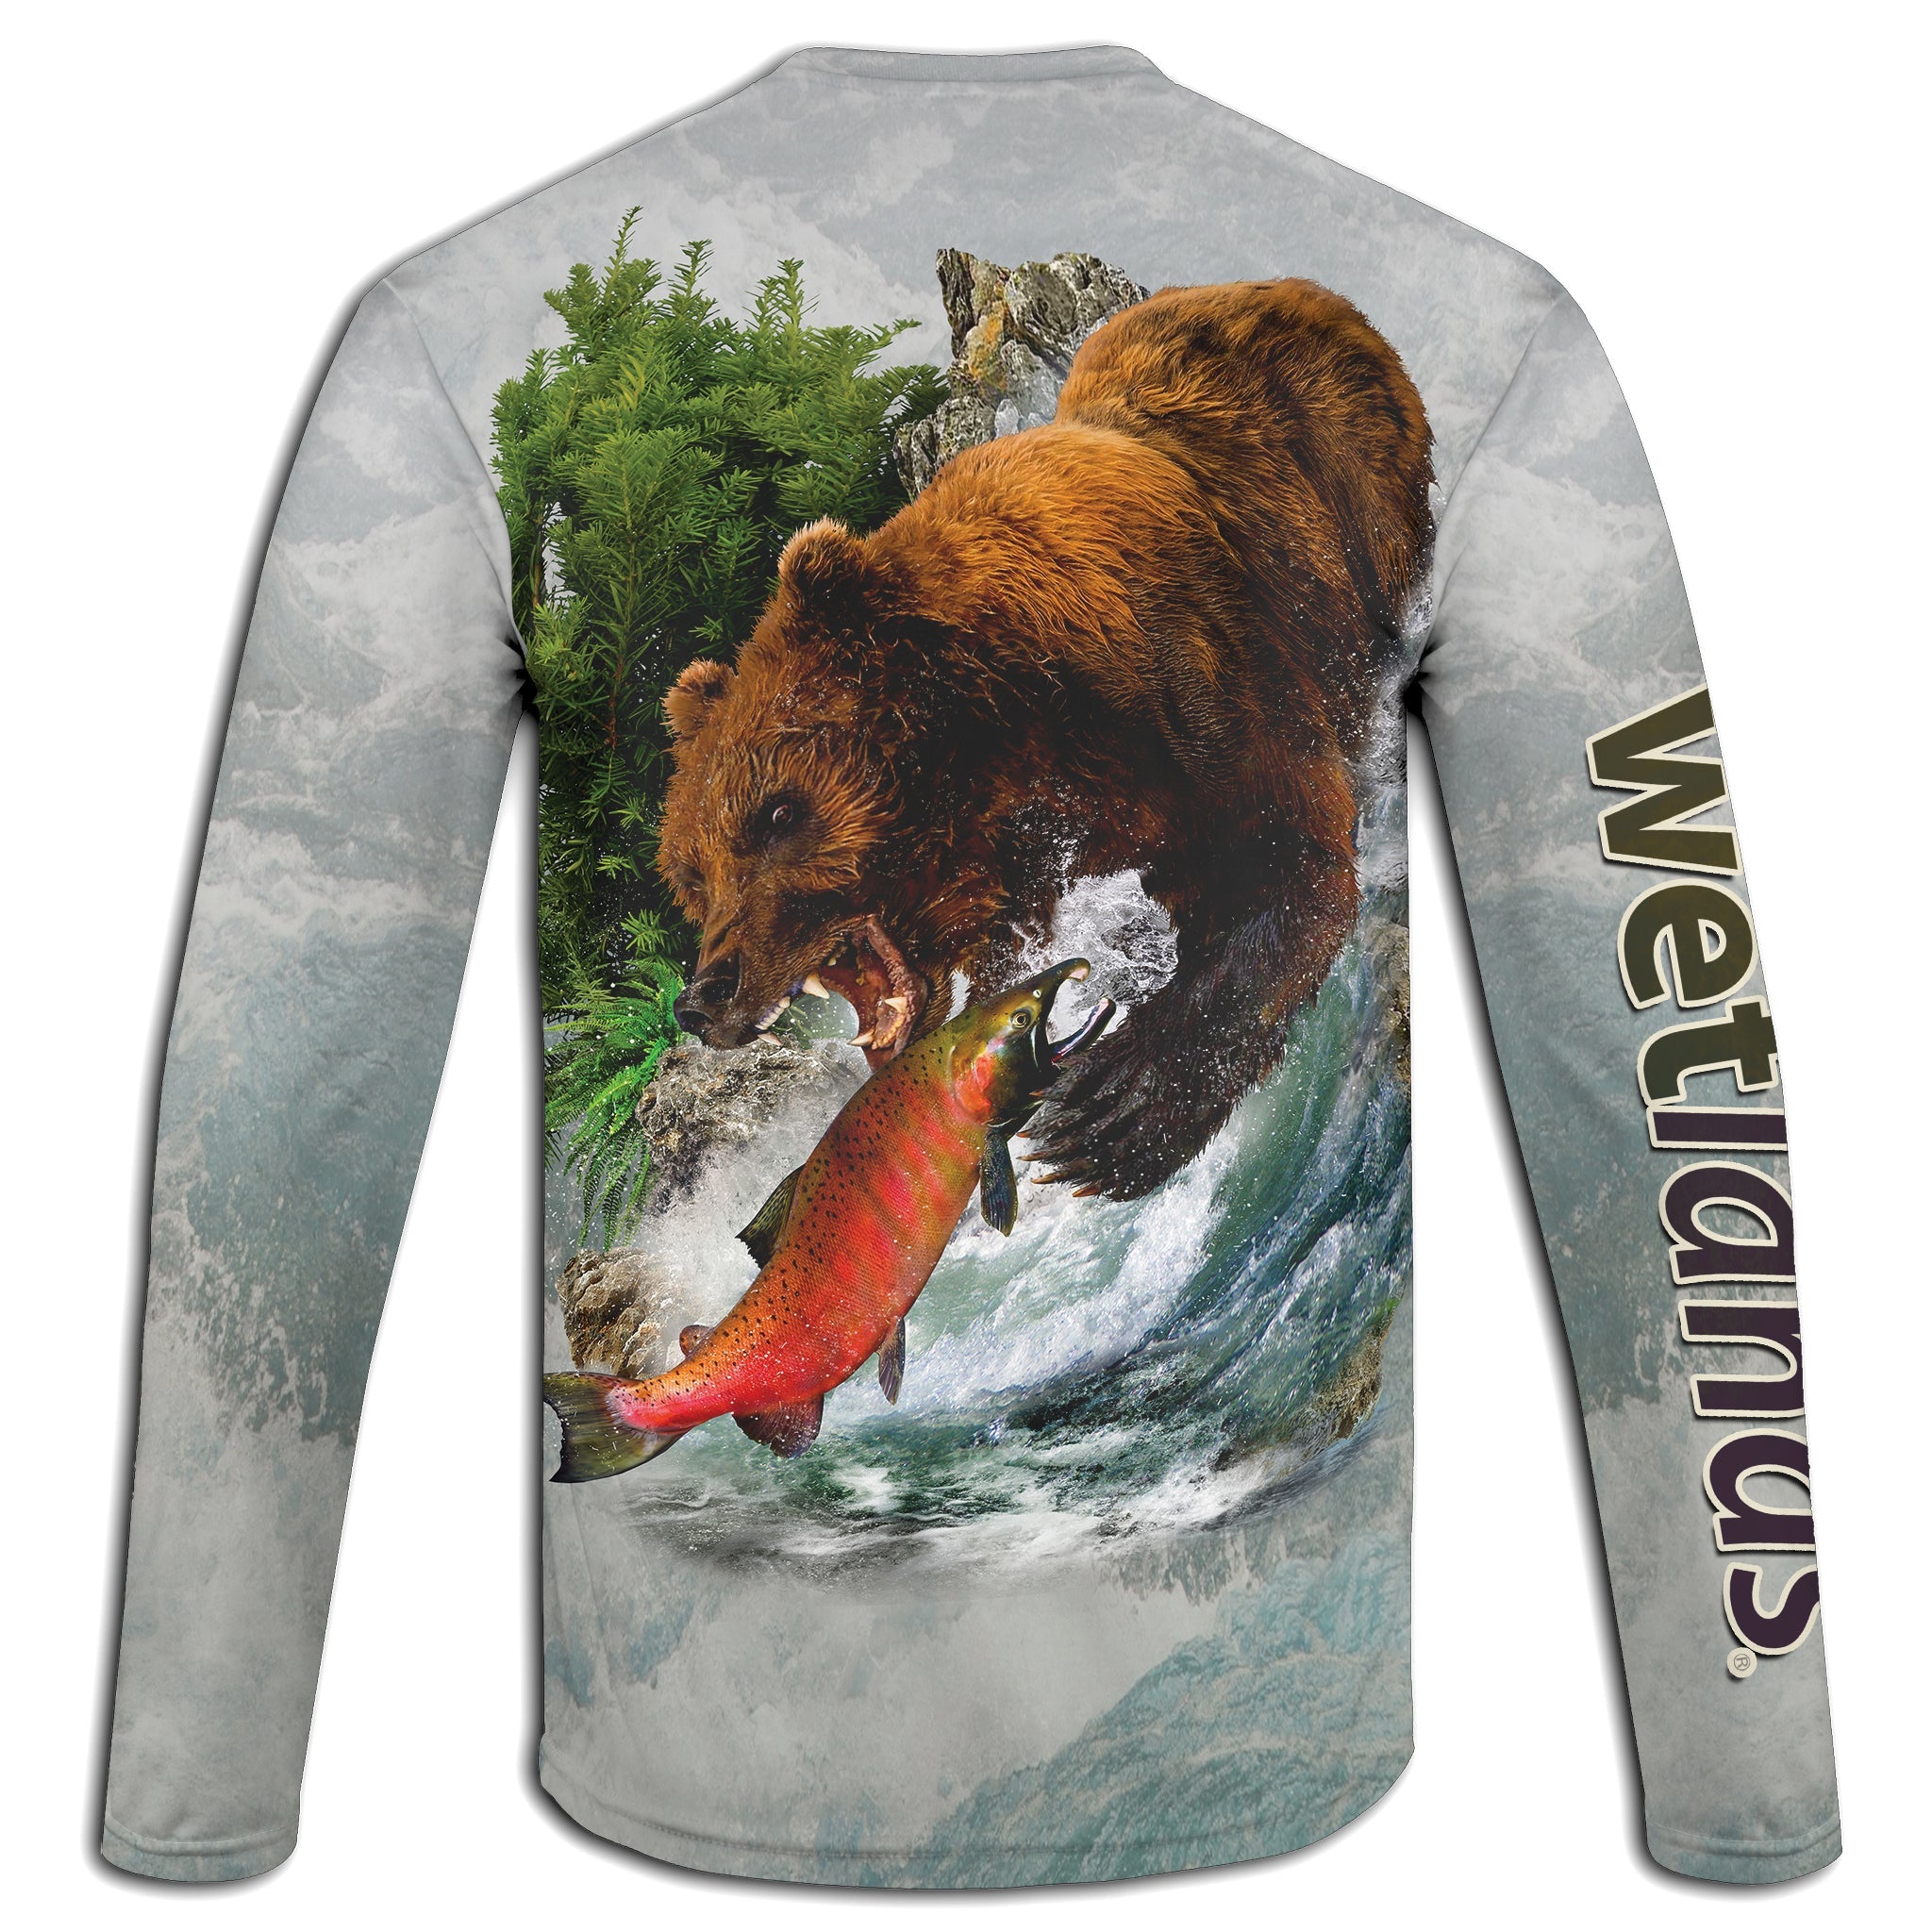 Grizzly & Salmon Wetlands Performance Apparel